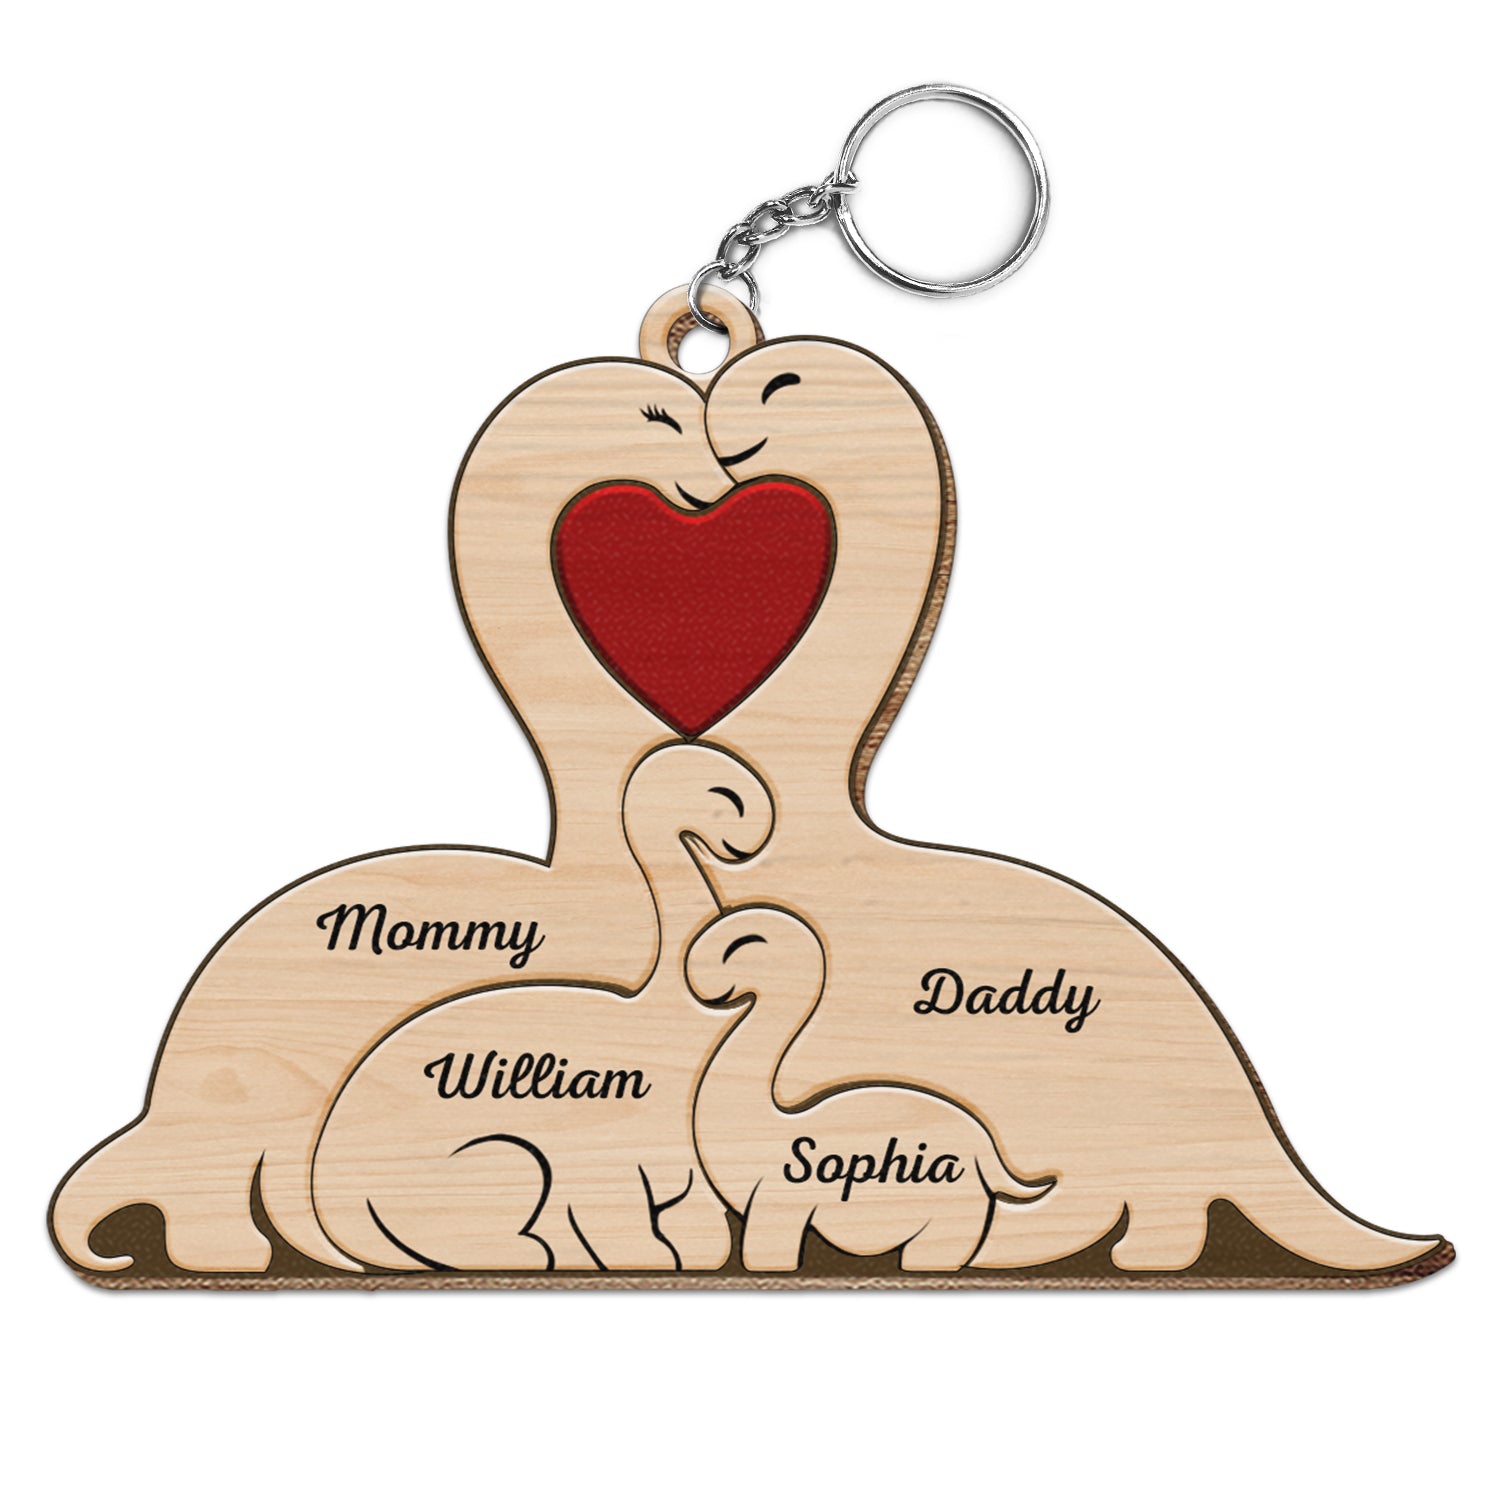 Family Dinosaurs - Gift For Parents, Father, Mother - Personalized Wooden Keychain